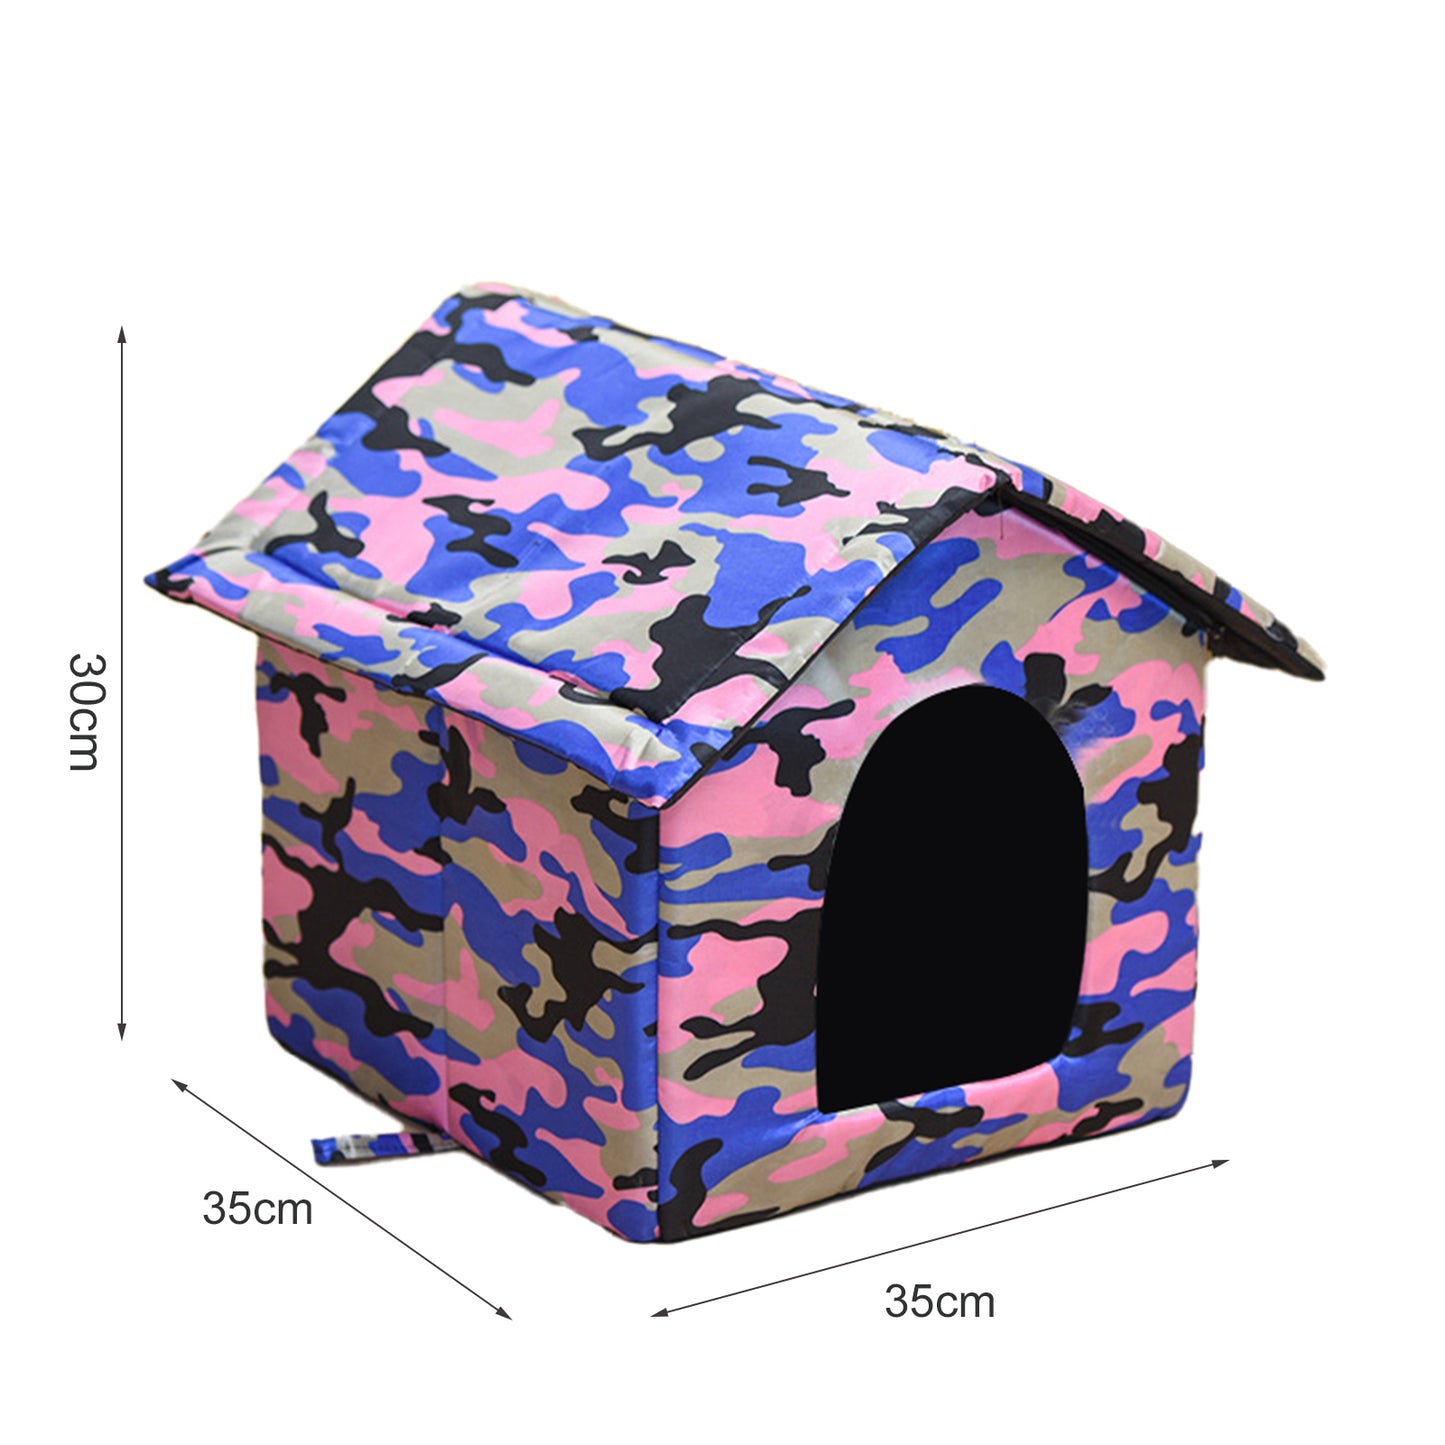 Pet House Exquisite Large Space Comfortable Portable Warm Cat Thickened Nest Dog House for Home Use